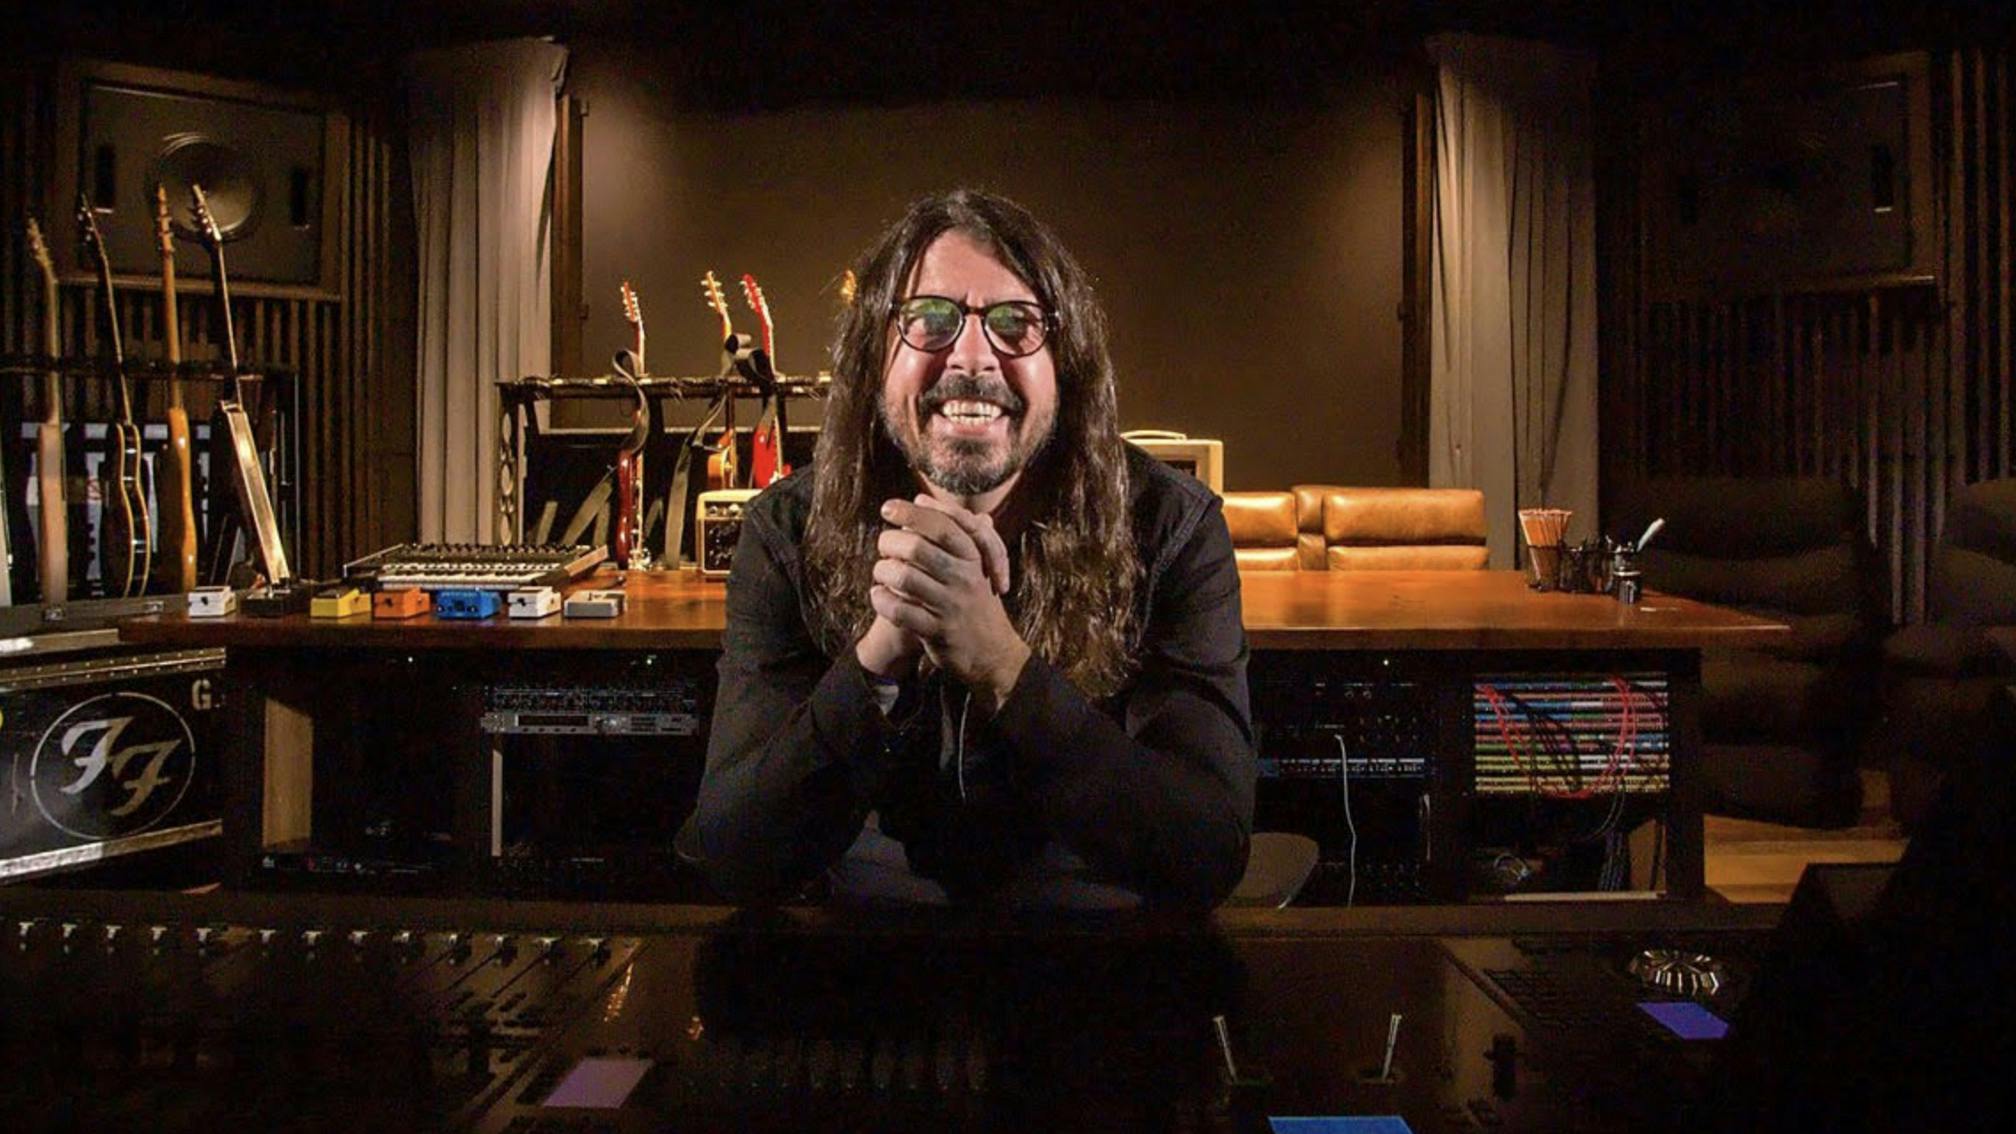 Watch the trailer for Dave Grohl's upcoming career-spanning interview on BBC Two